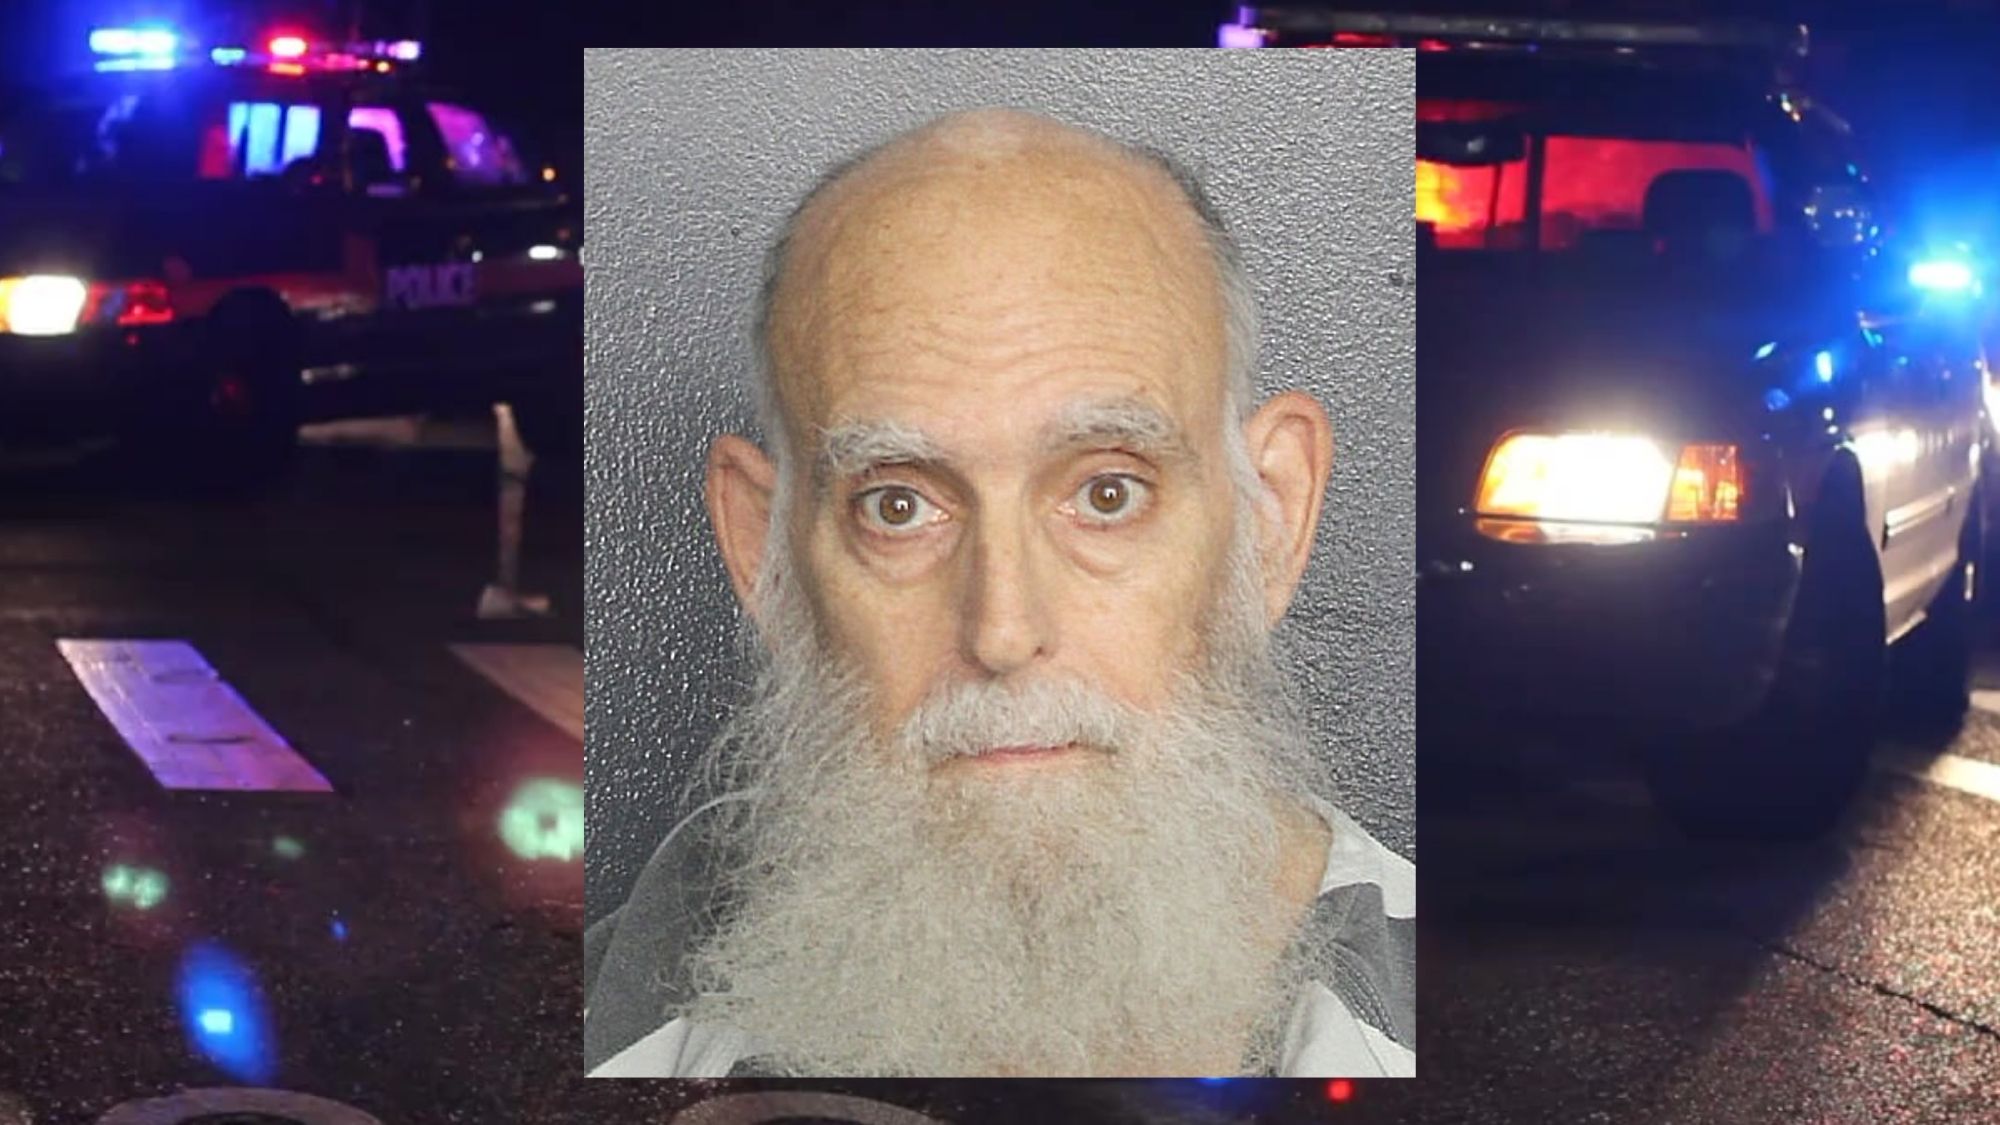 Tamarac Man Arrested For Battery and Child Abuse, Claims Antisemitism